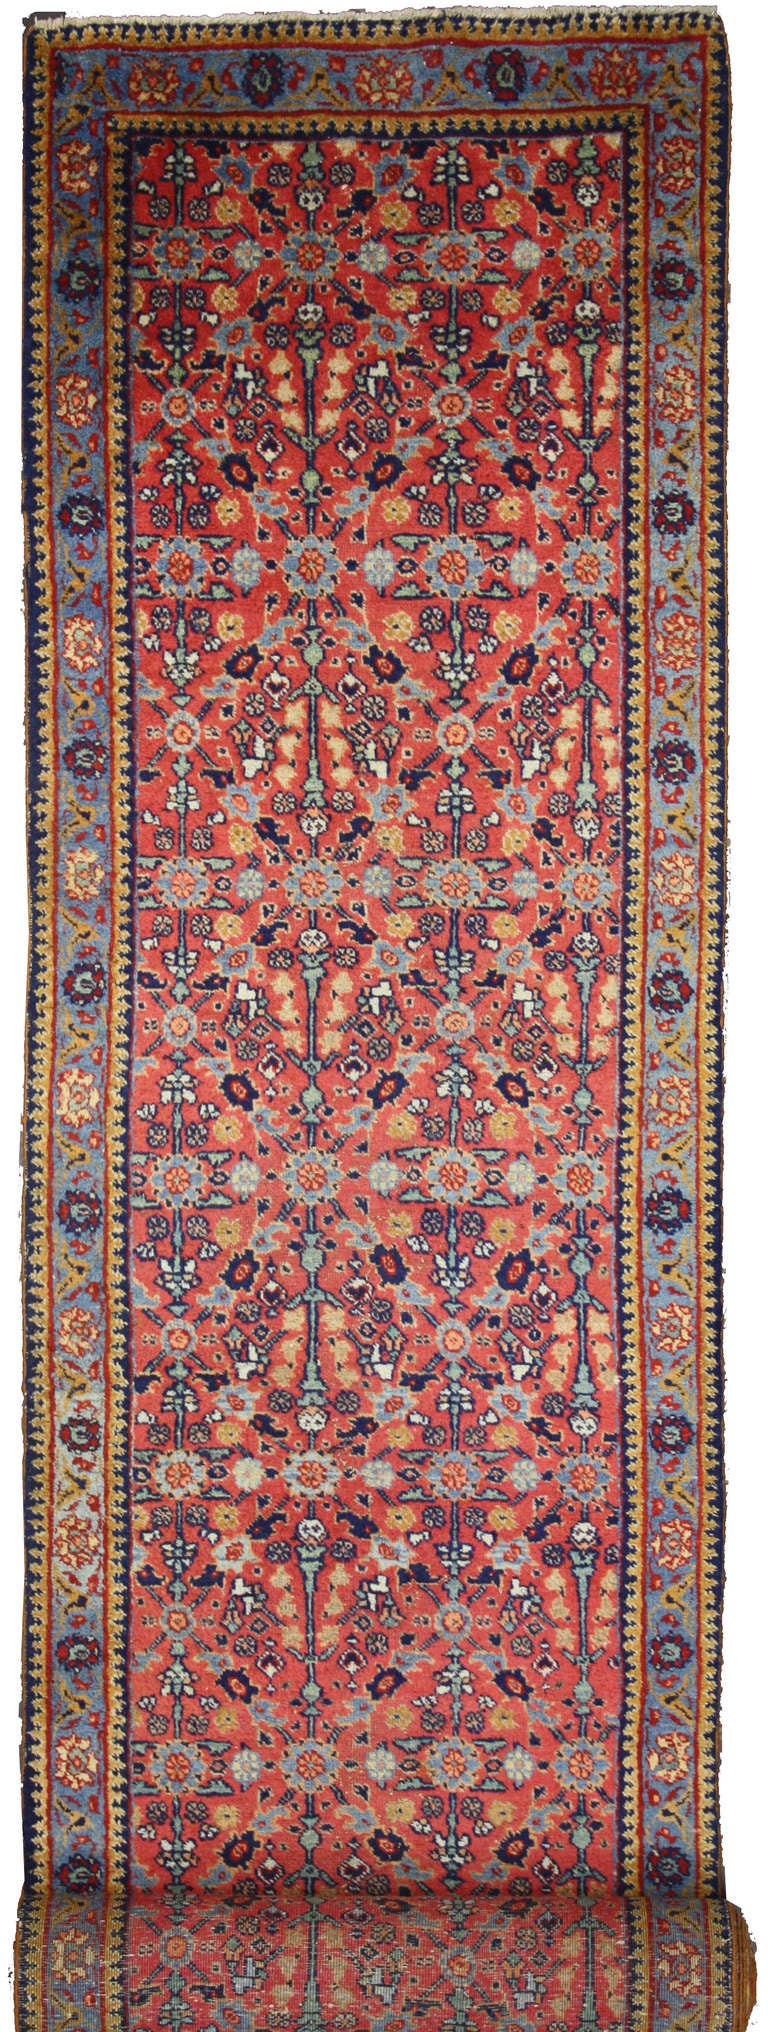 Wool Antique Persian Tabriz Carpet Runner with Modern Traditional Style